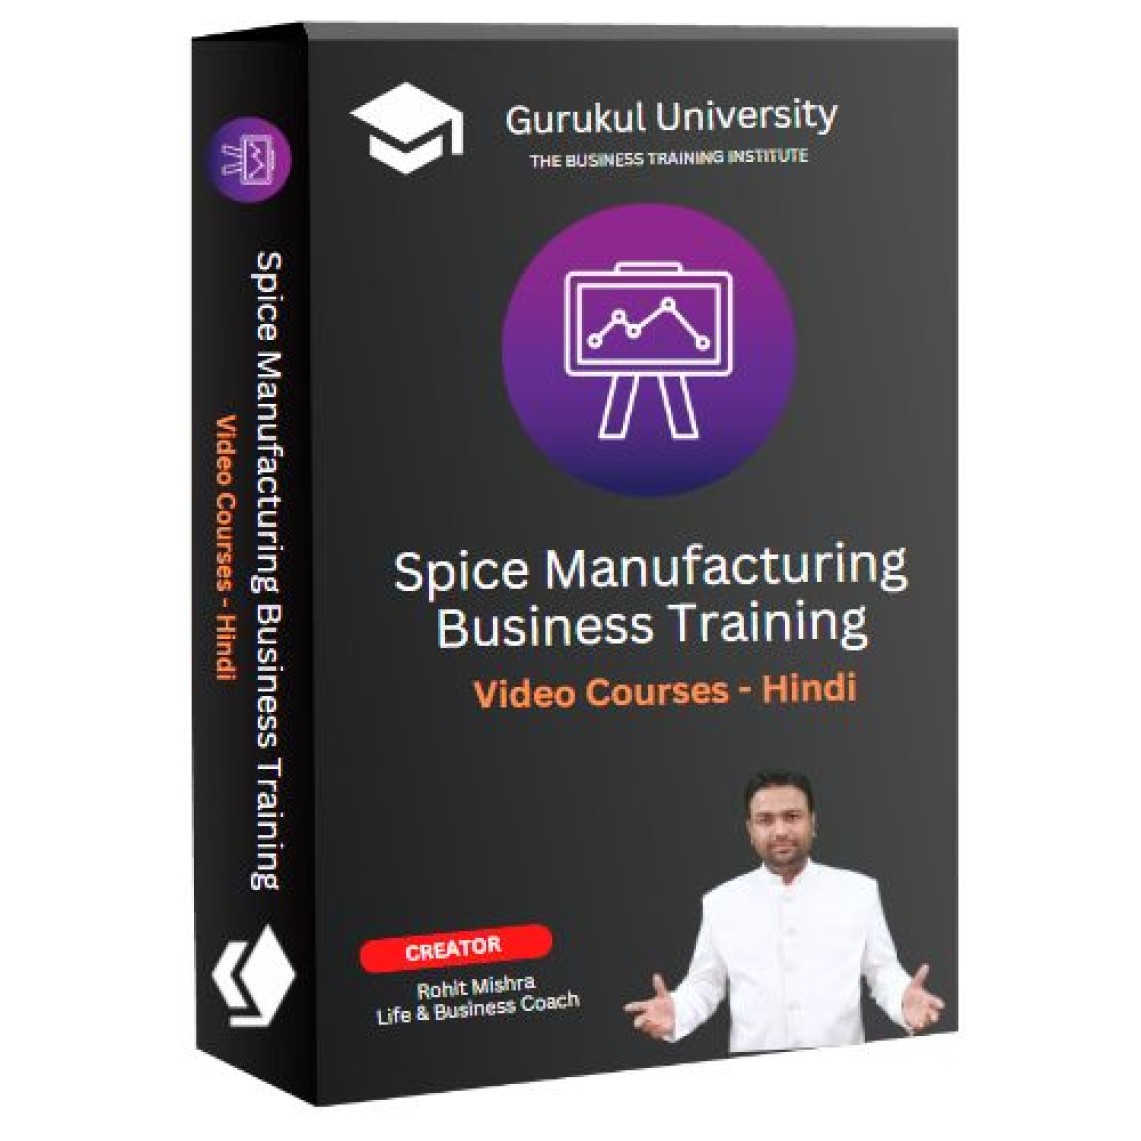 Spice Manufacturing Business Training